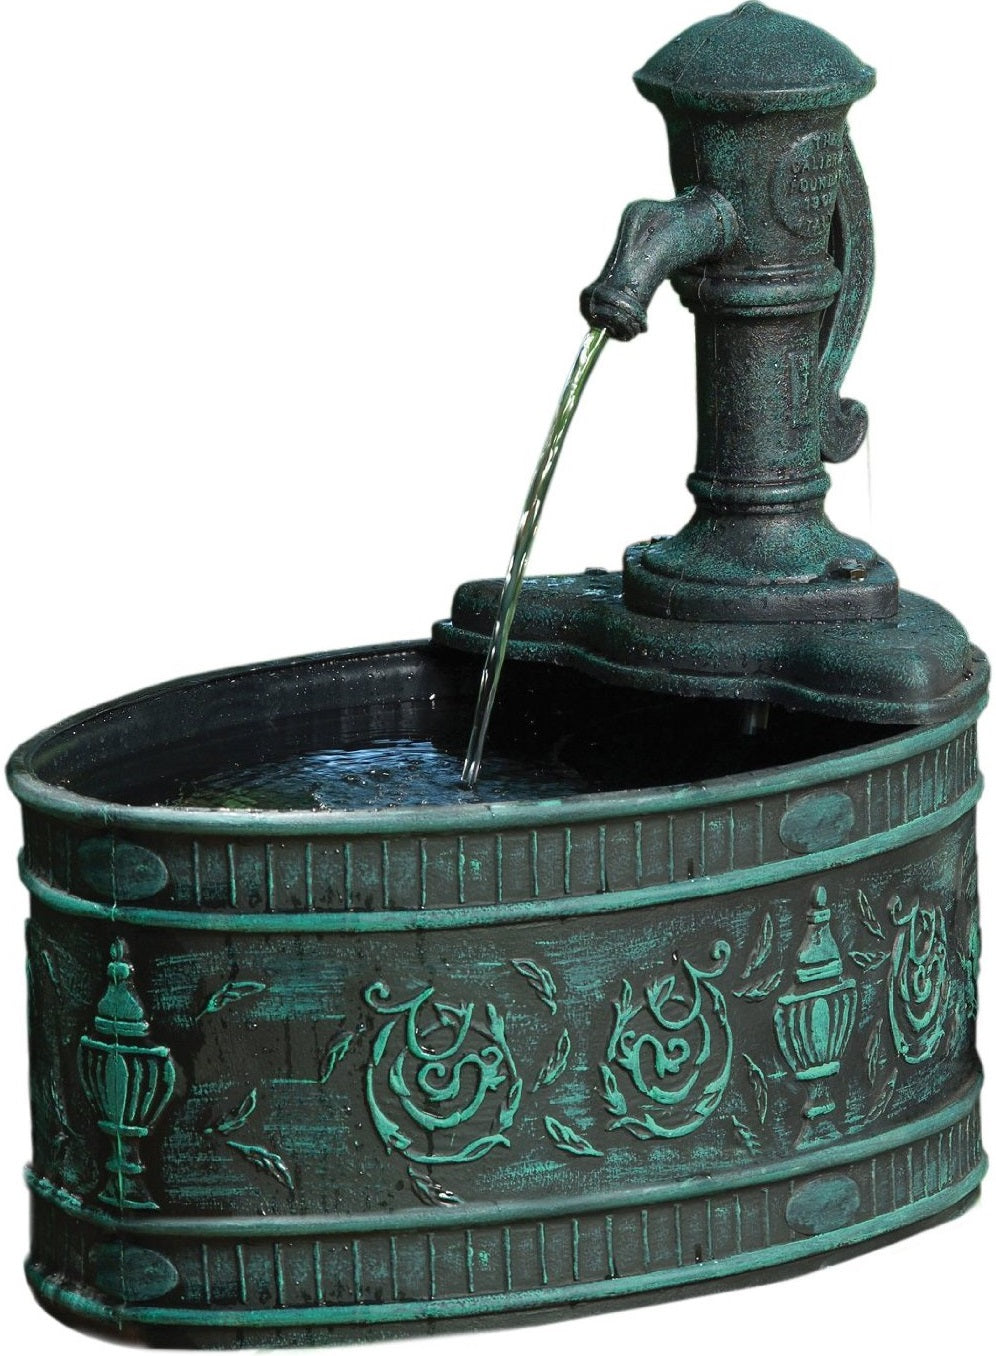 buy fountains at cheap rate in bulk. wholesale & retail outdoor & lawn decor store.